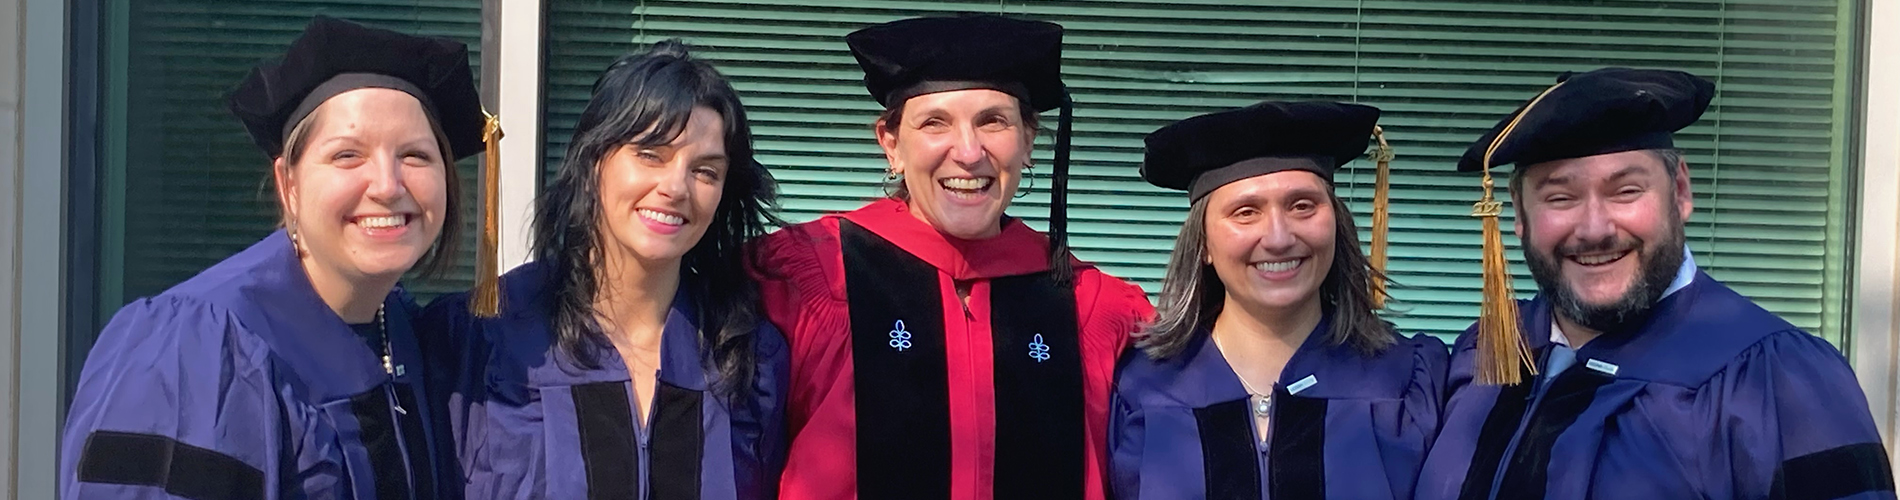 Five people in doctorate robes pose for a picture